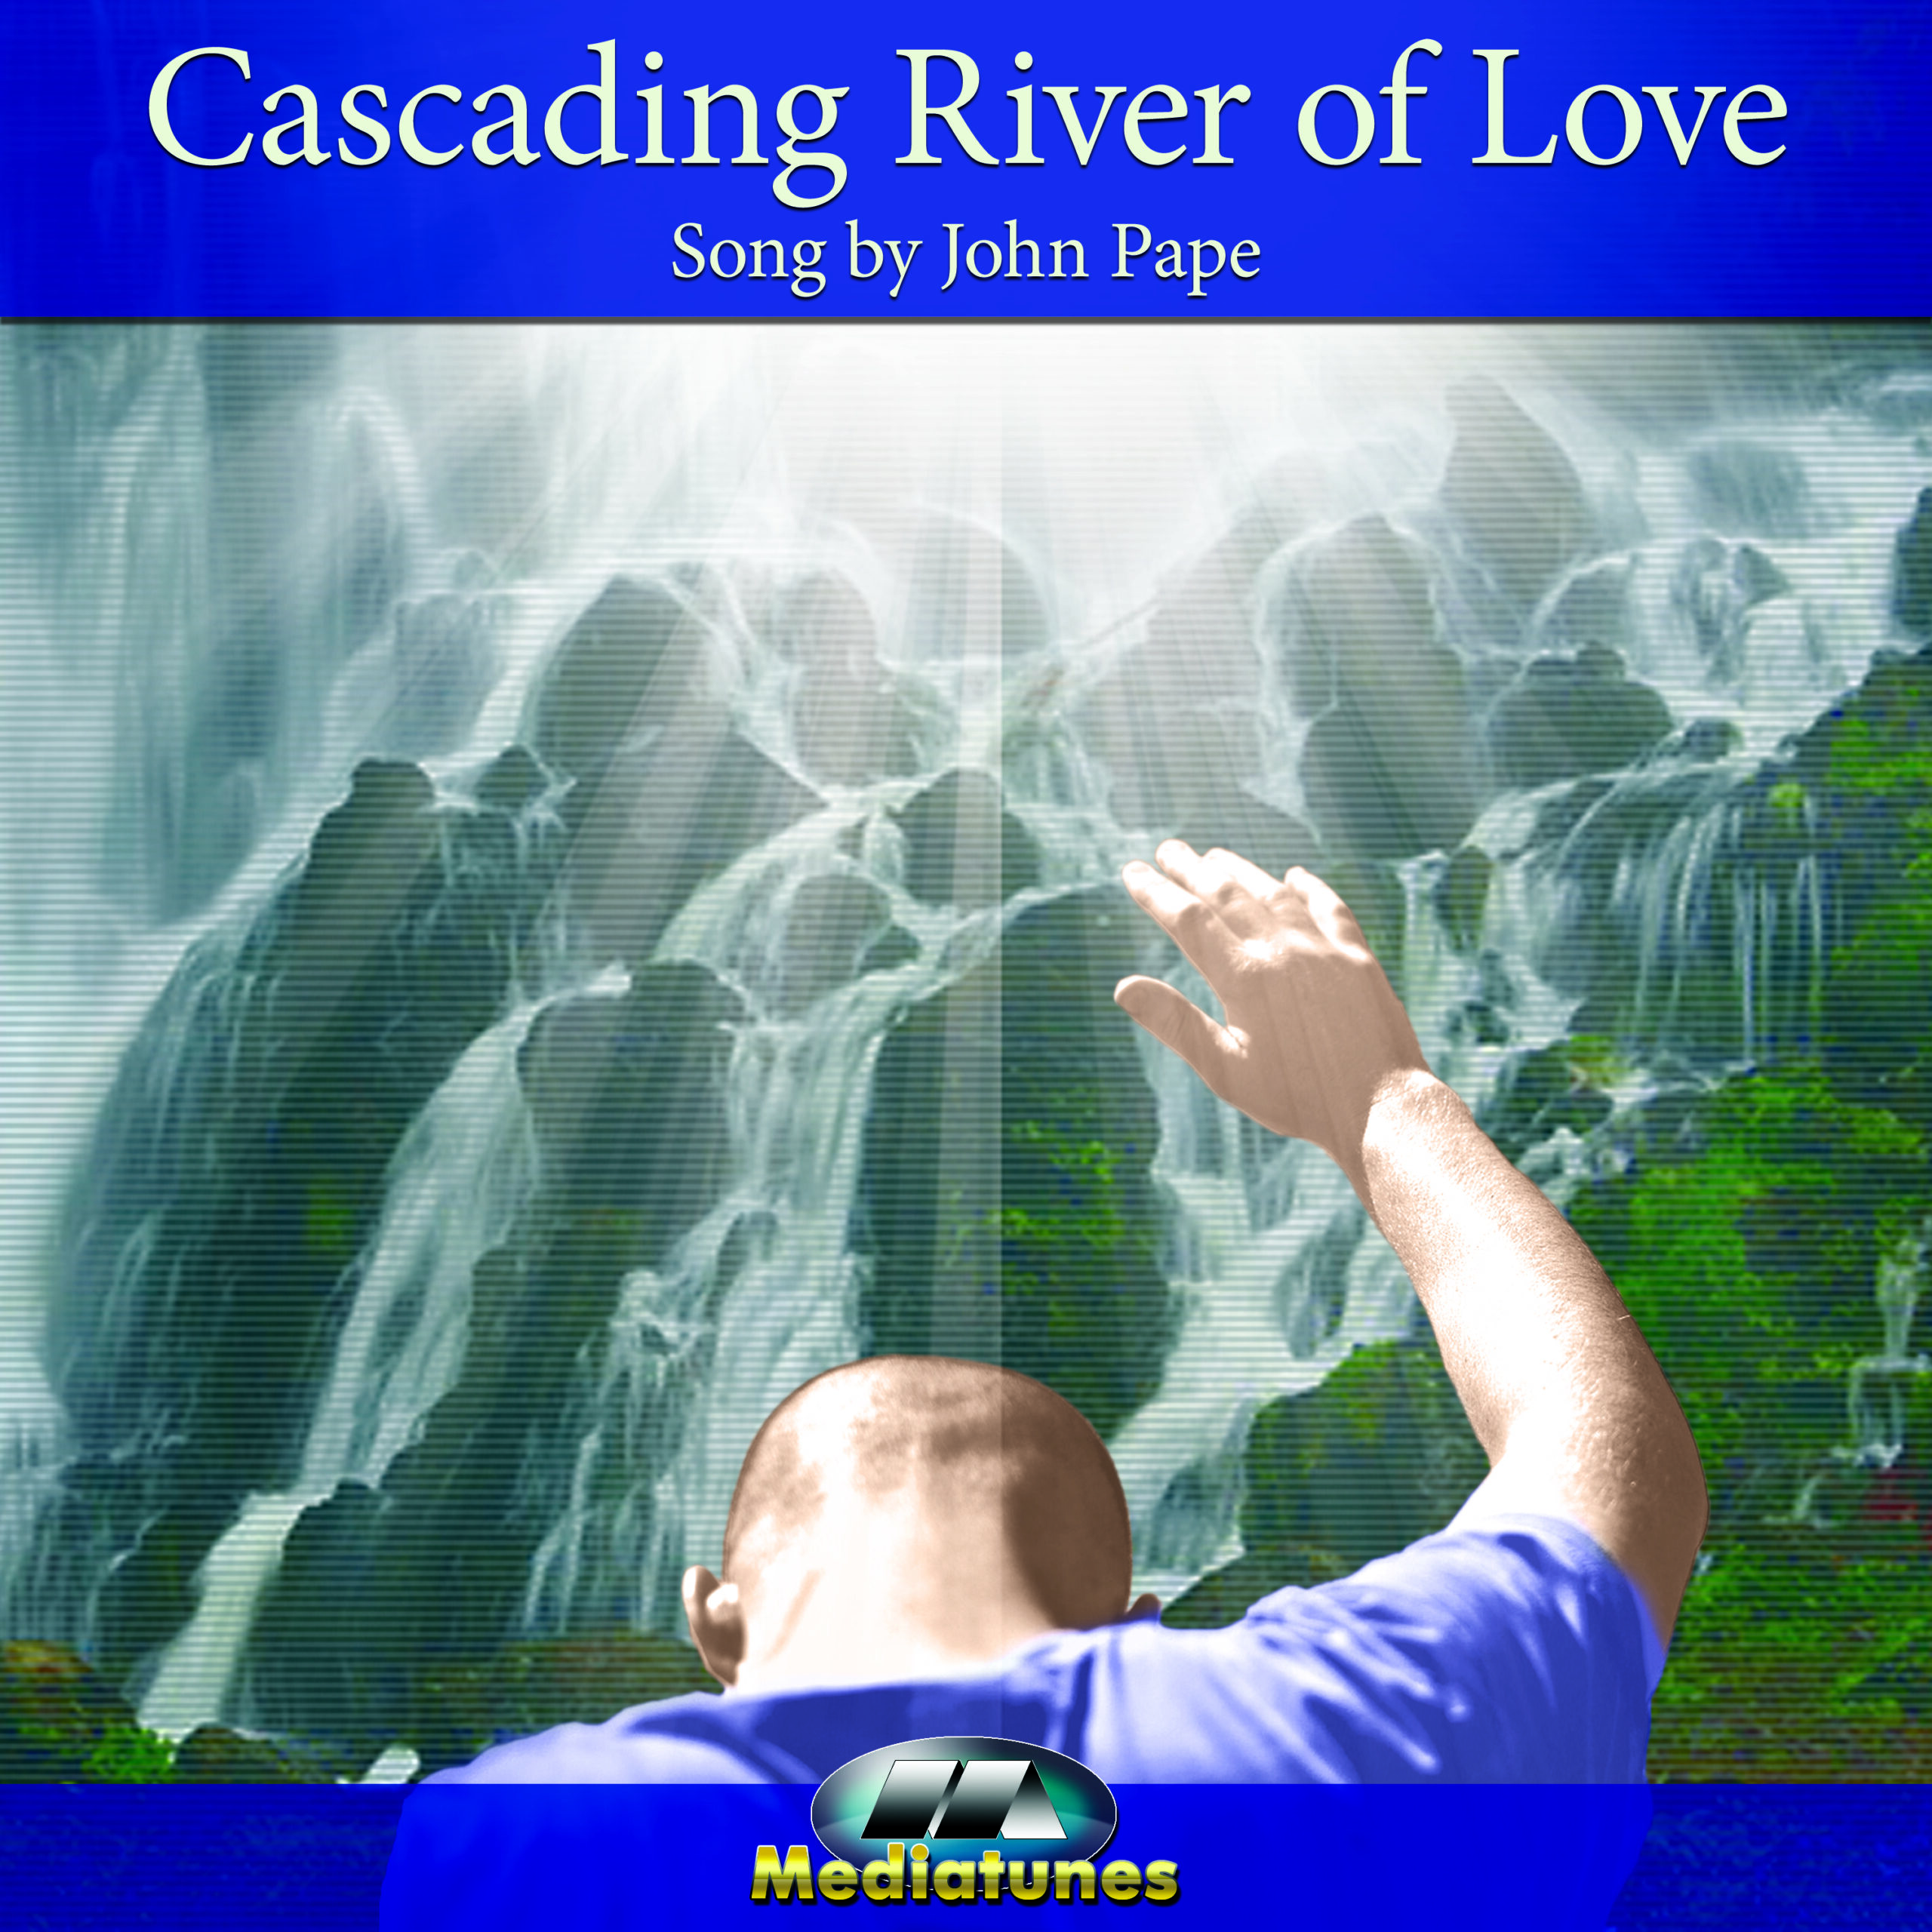 Worship Ministry Resources for the Song Cascading River of Love